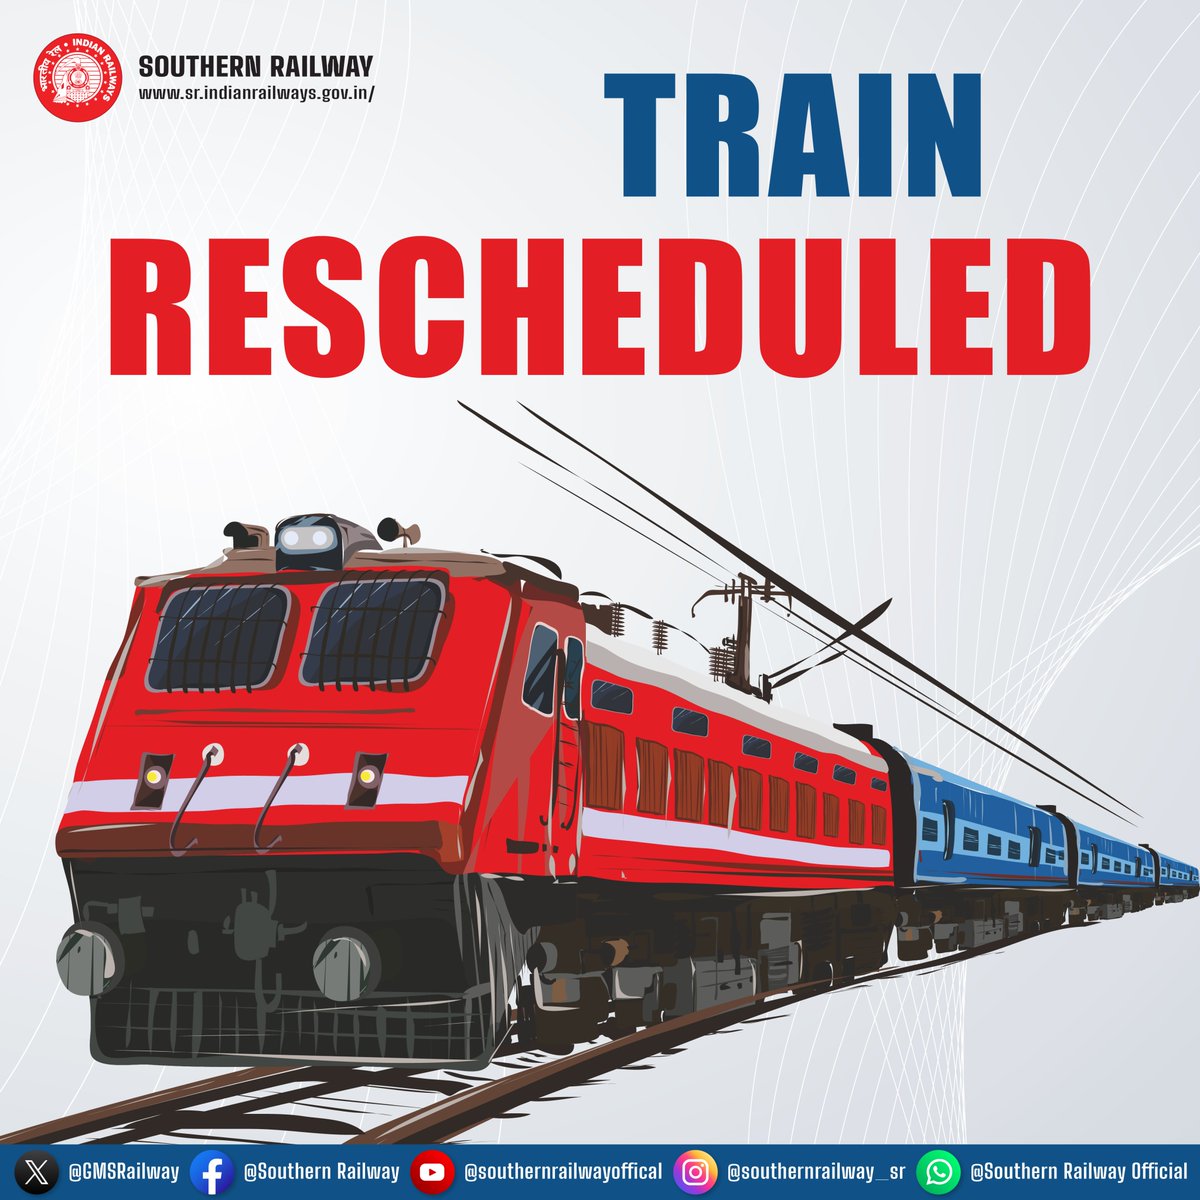 Train Rescheduled:

Train No. 06020 Dr MGR Chennai Central – Nagercoil Special scheduled to leave Dr MGR Chennai Central at 15.10 hrs on 20.05.2024 (Today) is rescheduled to leave at 23.10 hrs on due to late running of pairing train  (Late by 8 hrs).

#SouthernRailway